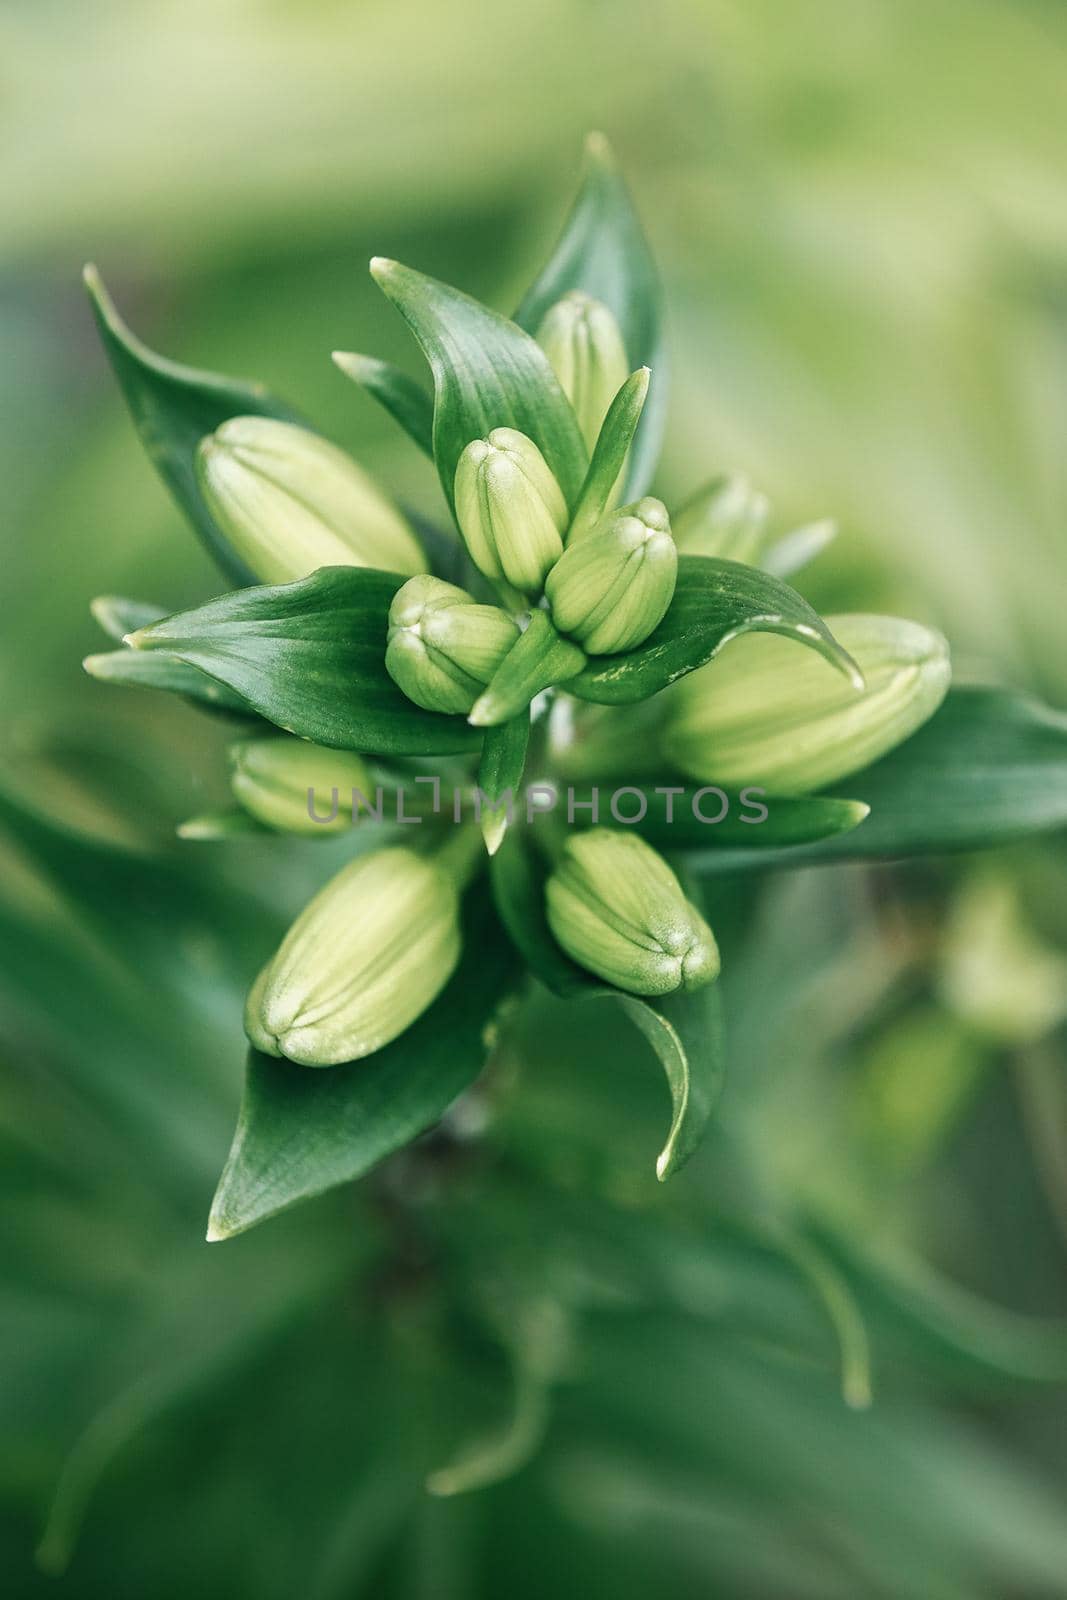 Lilium flowers before bloom, asiatic hybrids ornamental cultivated, flowering lilies, green bouquet in, buds